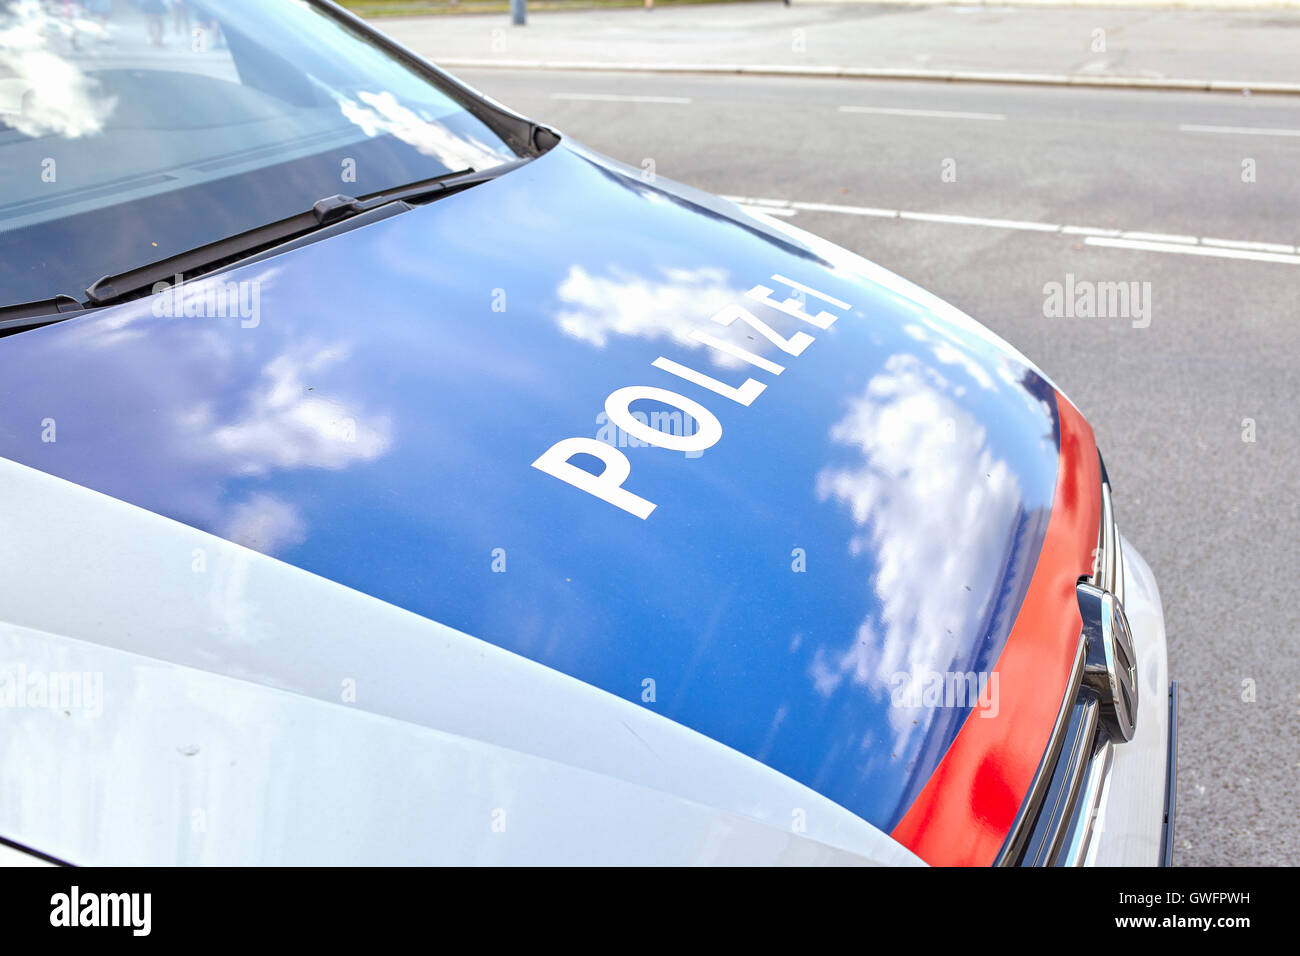 Vienna, Austria - August 14, 2016: Close up picture of a police car hood parked on a street. Stock Photo